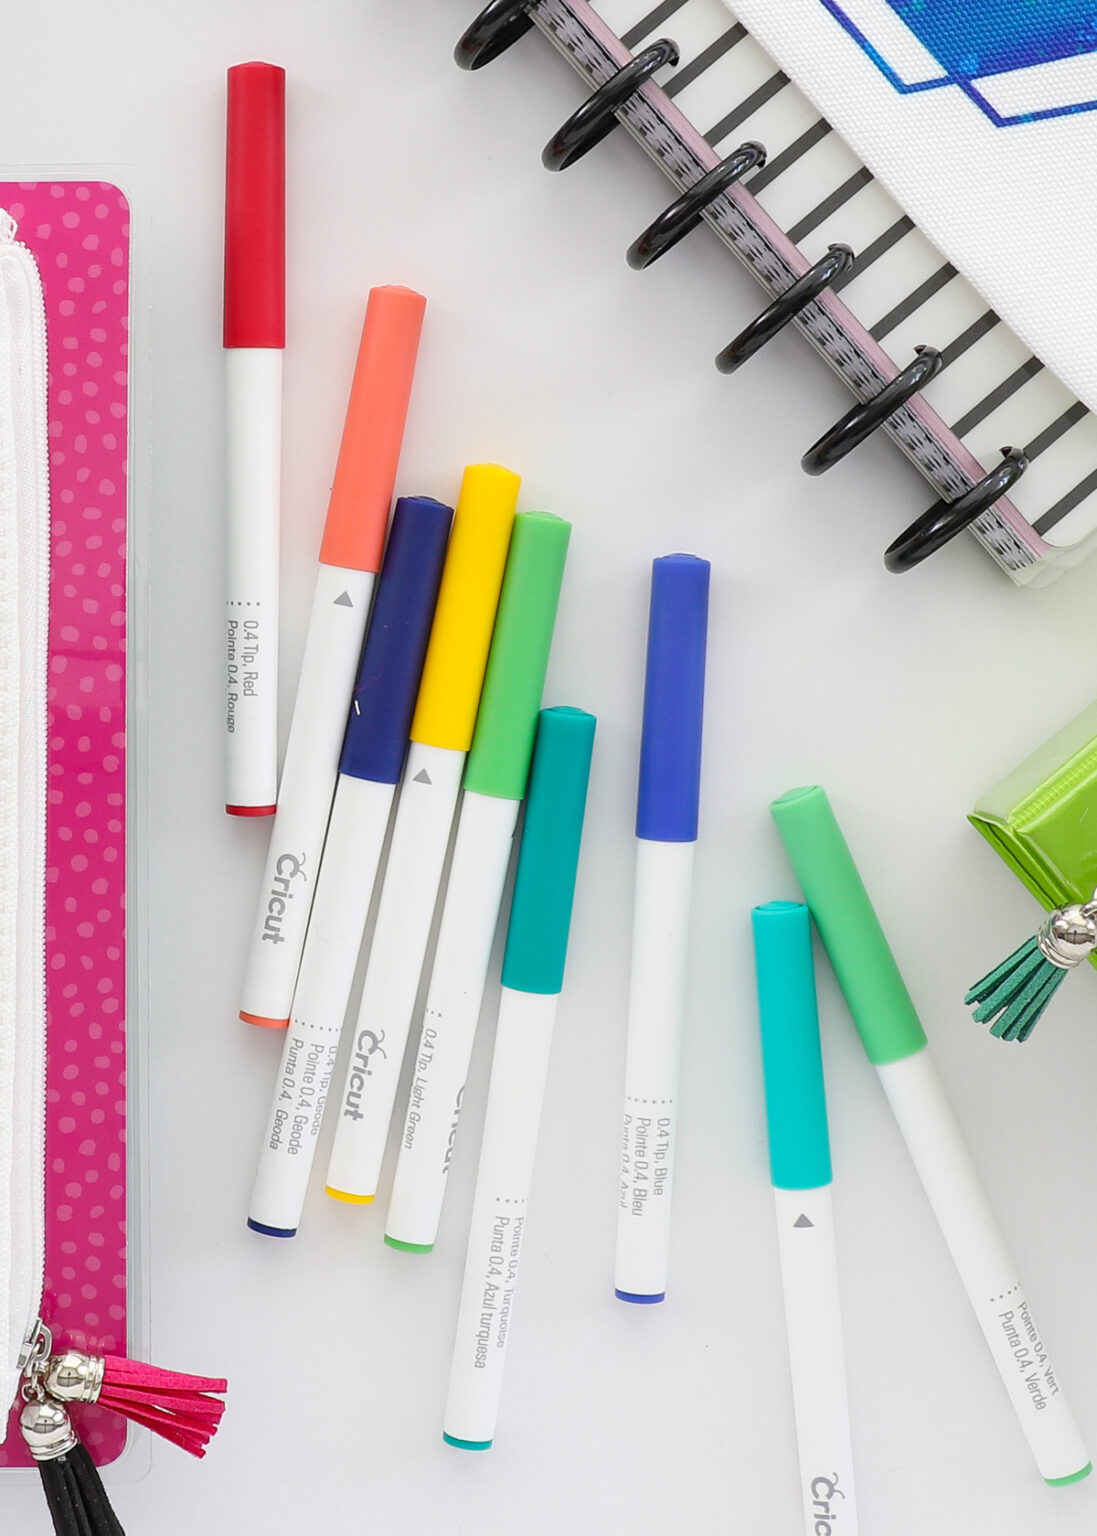 How to Use Cricut Pens | A Comprehensive Guide - The Homes I Have Made